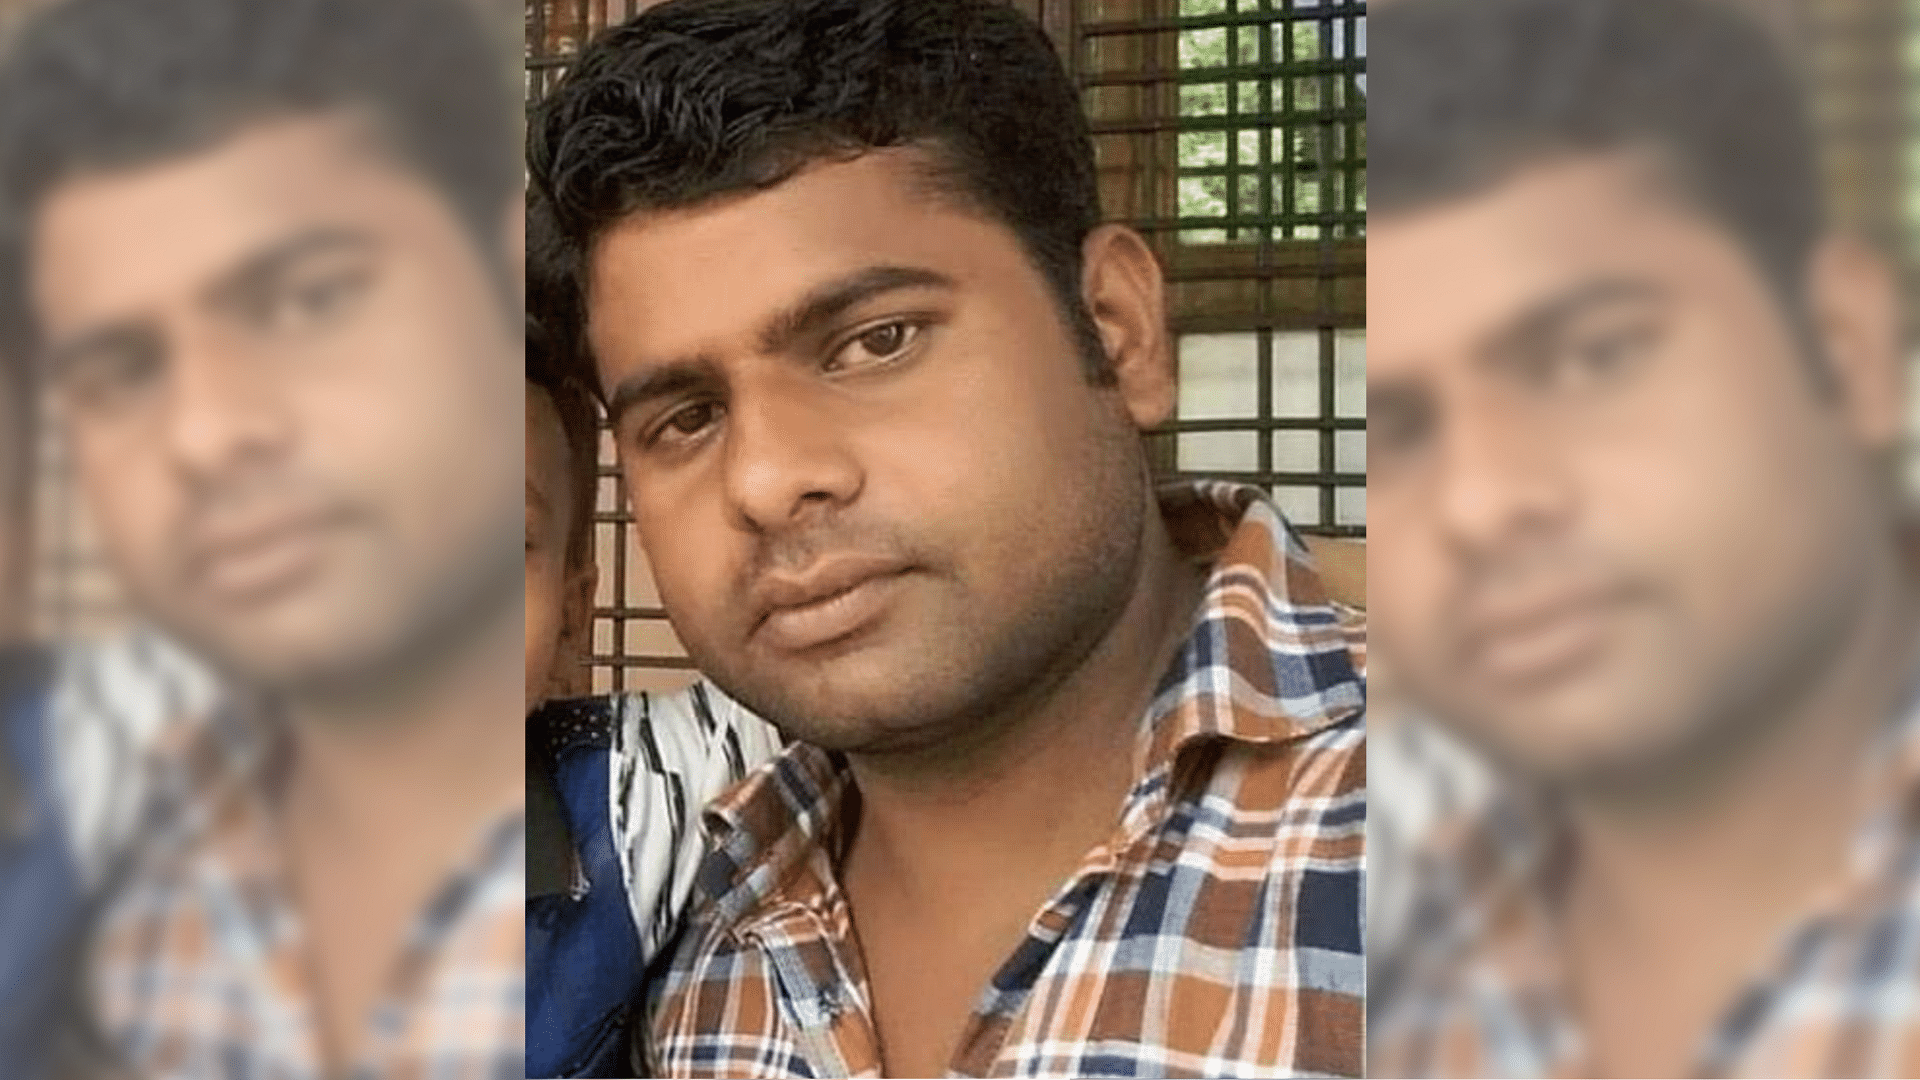 Pushpendra Yadav was allegedly killed in a police encounter on Sunday night in Jhansi.